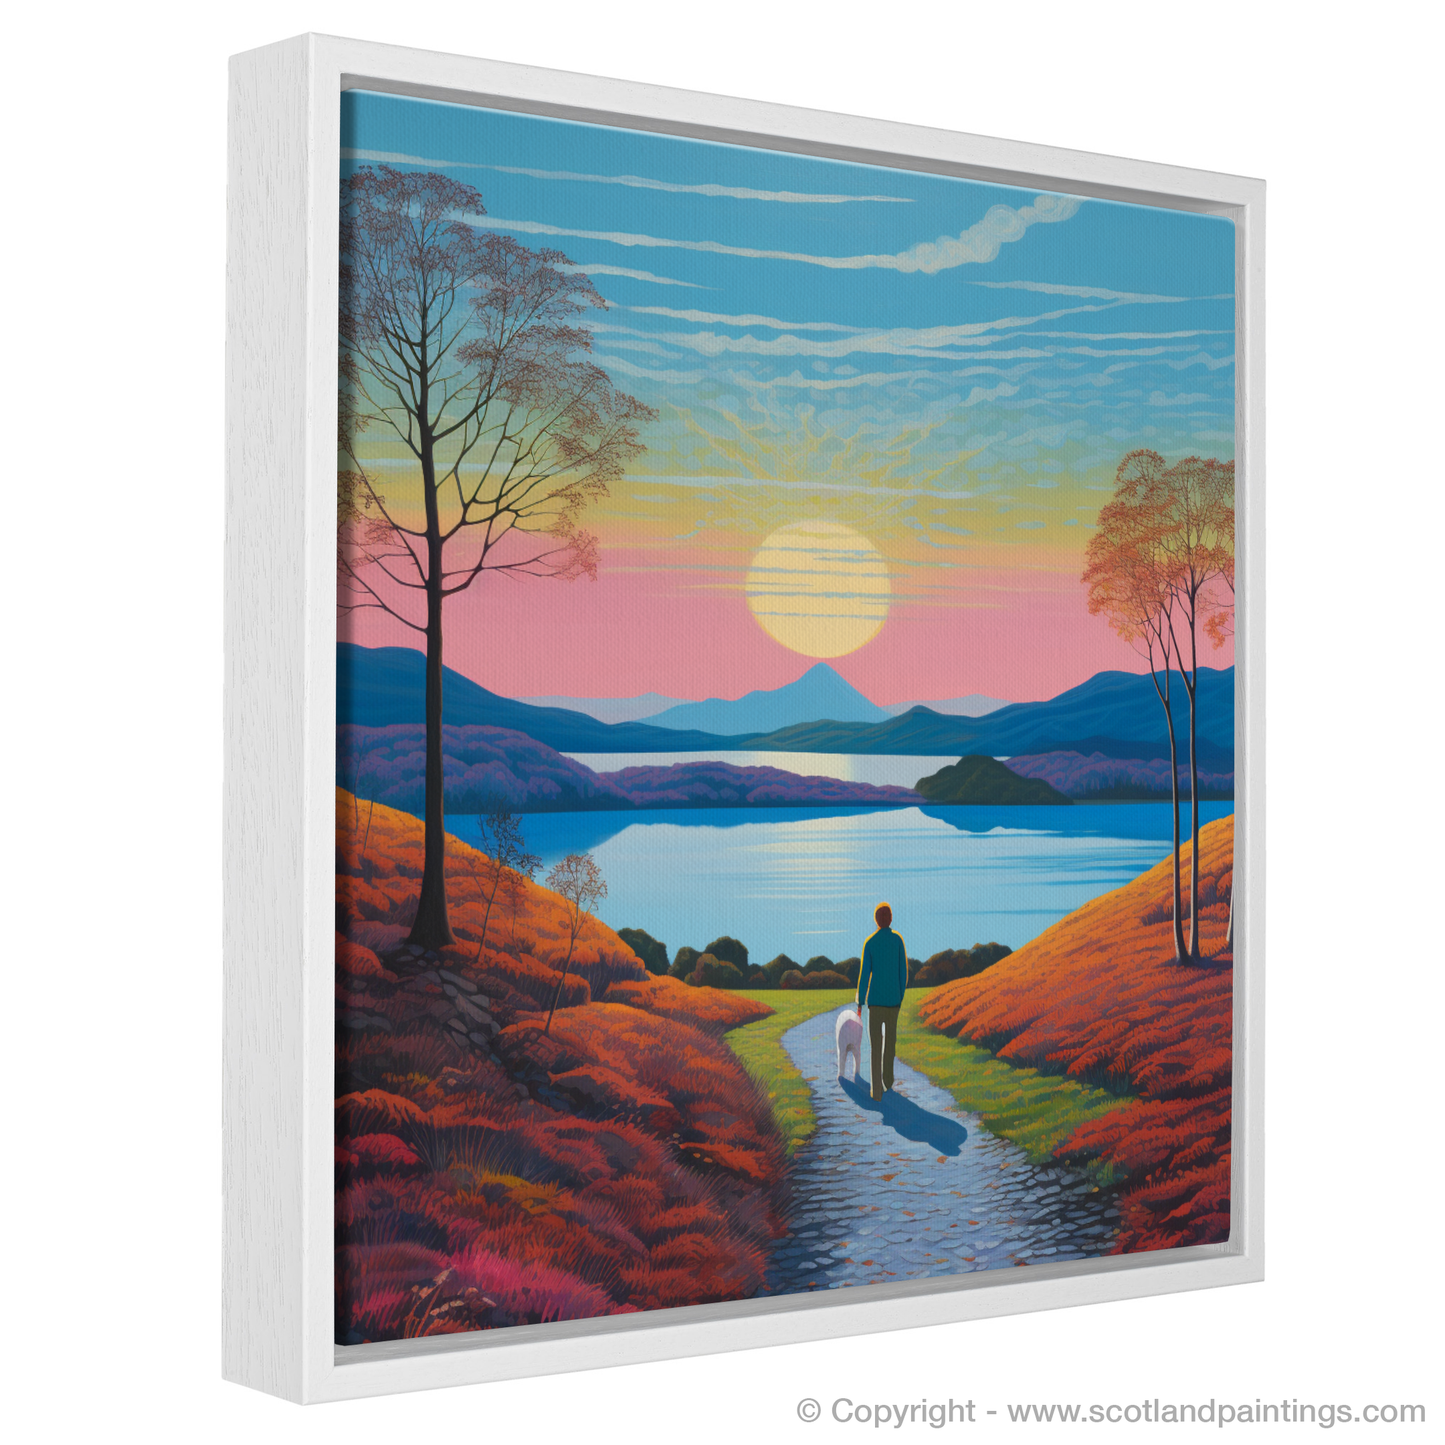 Painting and Art Print of A man walking dog at the side of Loch Lomond entitled "Walking the Twilight Path at Loch Lomond".